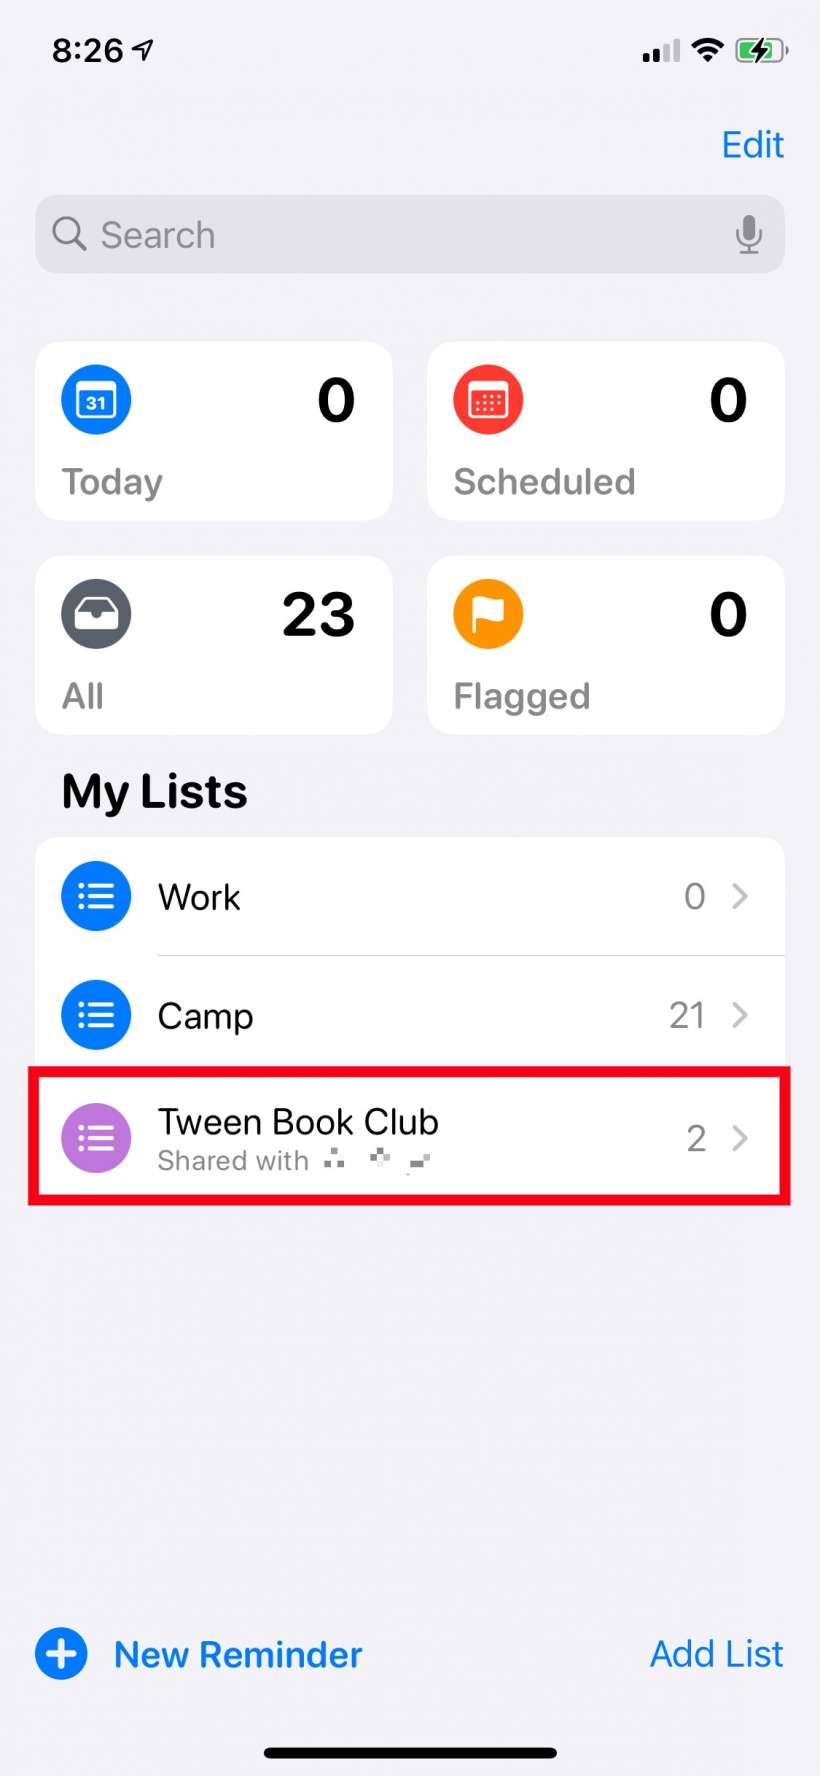 How to assign reminders in shared Reminder lists on iPhone and iPad.